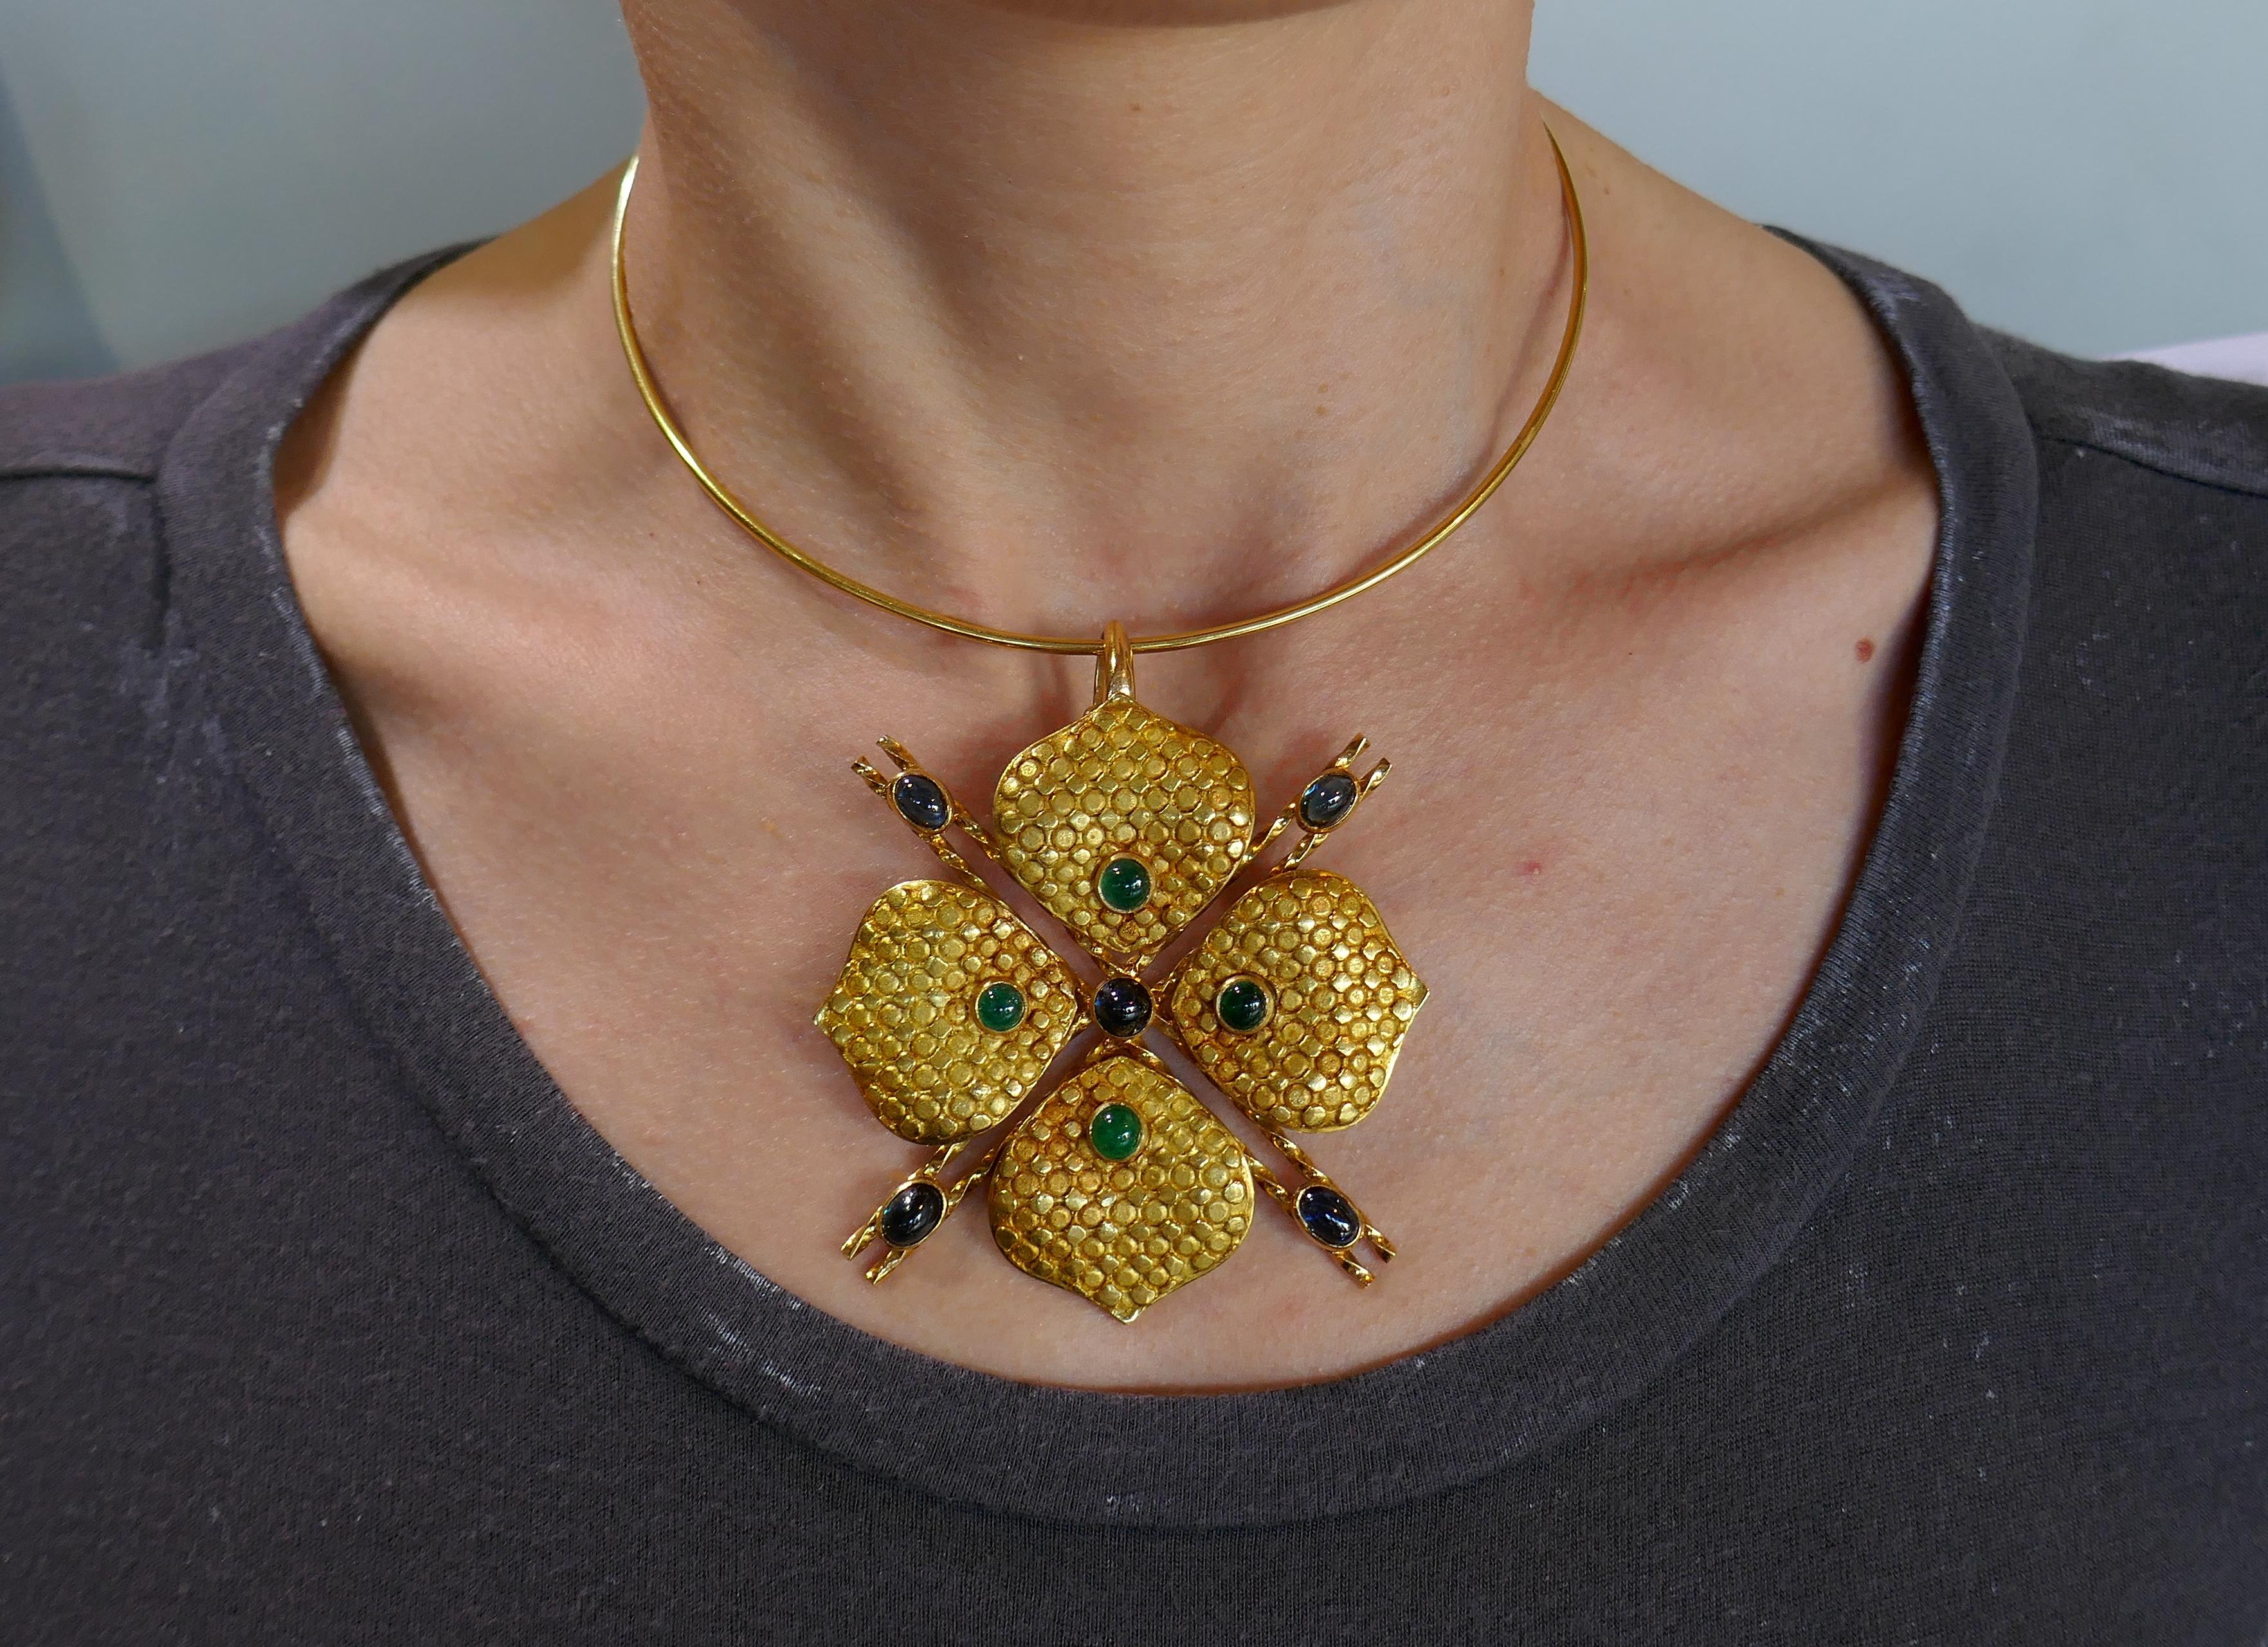 Lovely set consisting of a necklace and a pair of earrings created in France in the 1970s. Colorful, joyful and wearable, the set is a great addition to your jewelry collection.
The necklace is made of 18 karat yellow gold and features a textured